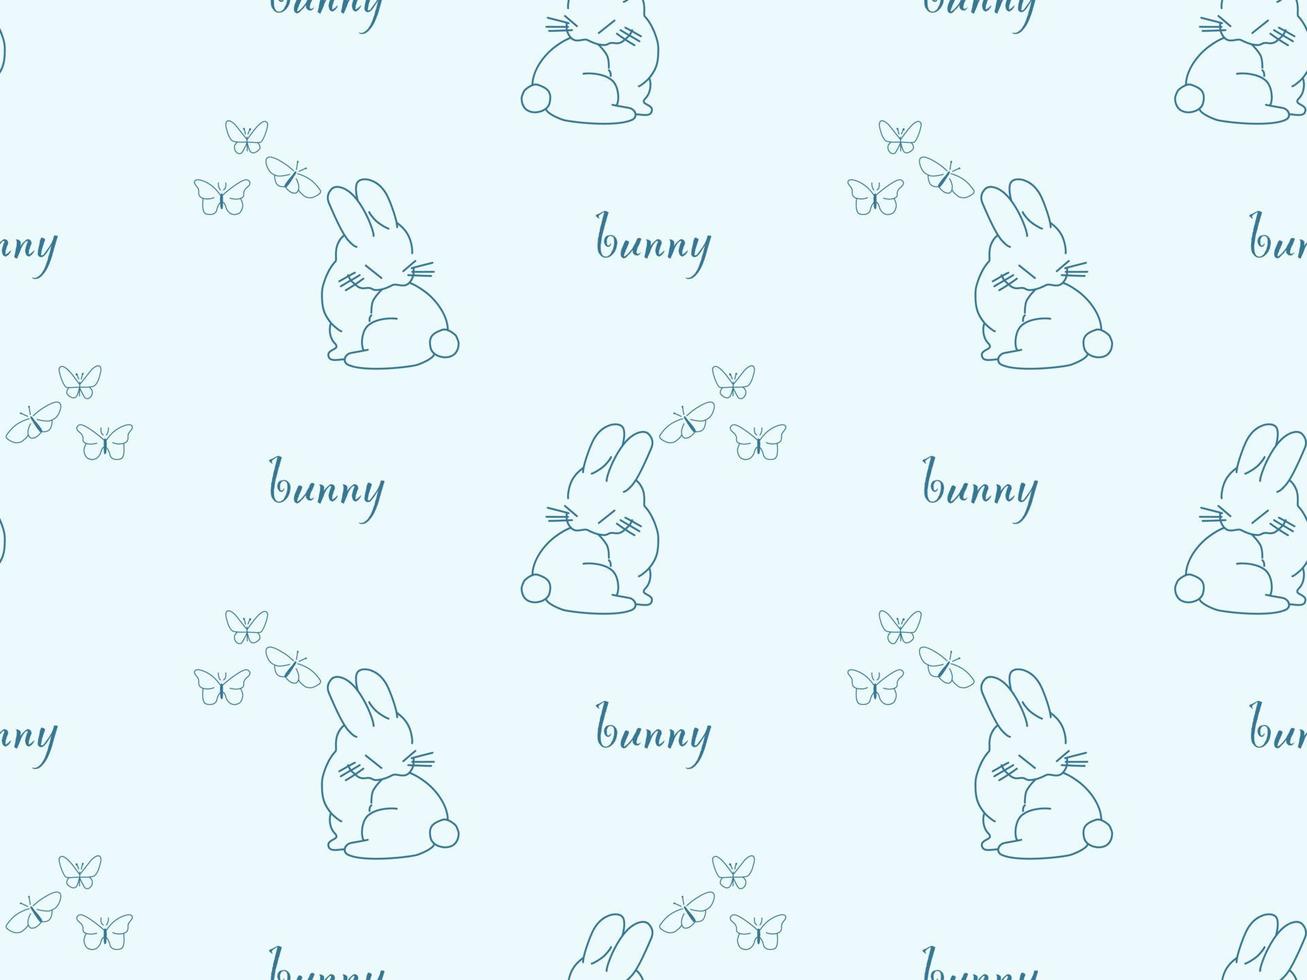 Bunny cartoon character seamless pattern on blue background vector